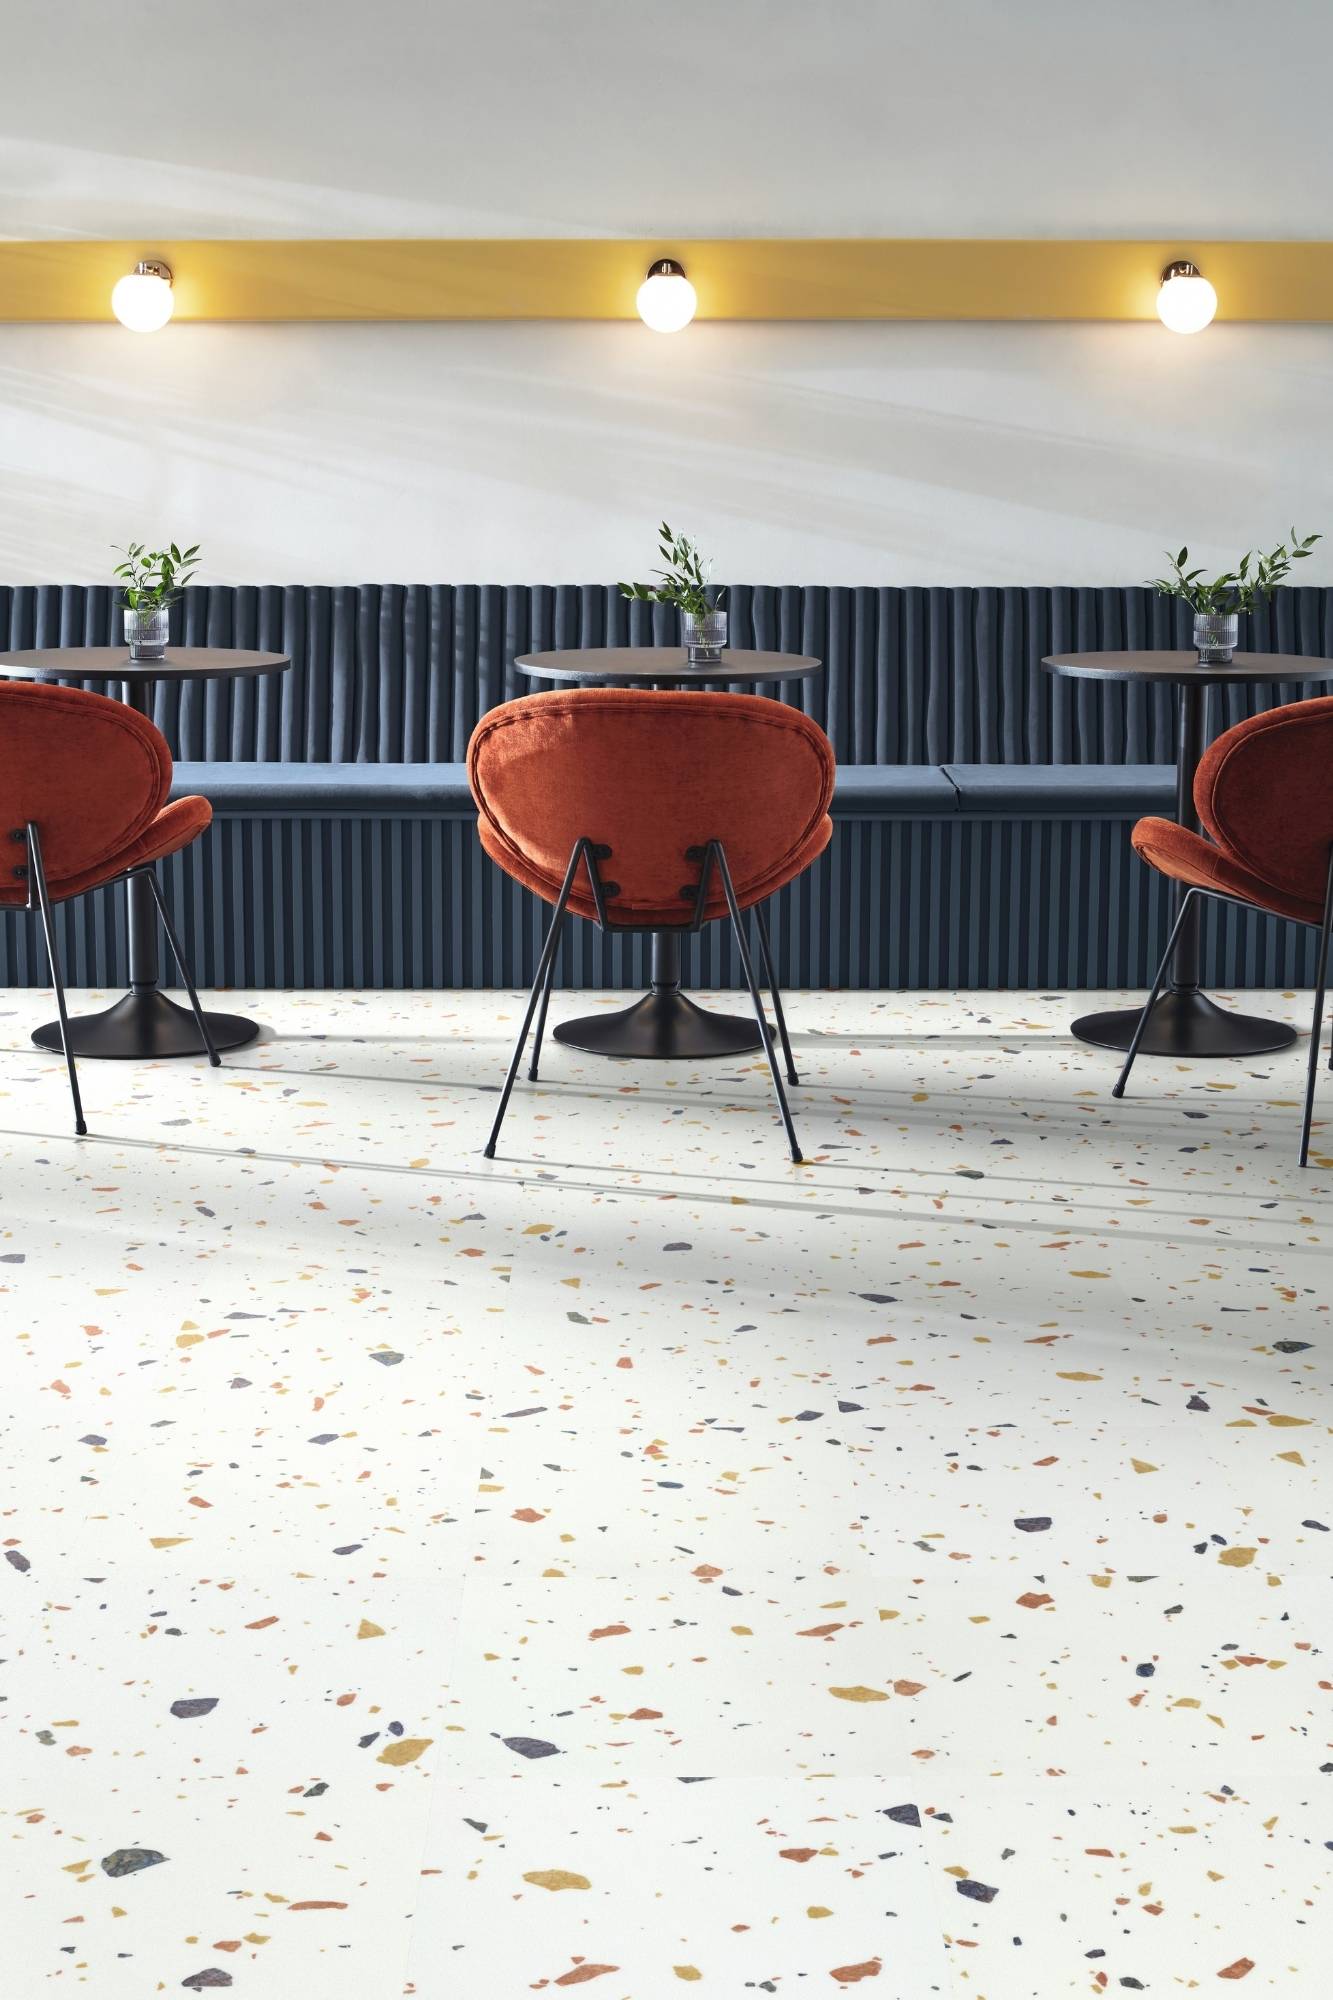 vinyl flooring, Karndean’s New Abstract Capsule Collection is Designed to Push the Boundaries of Design